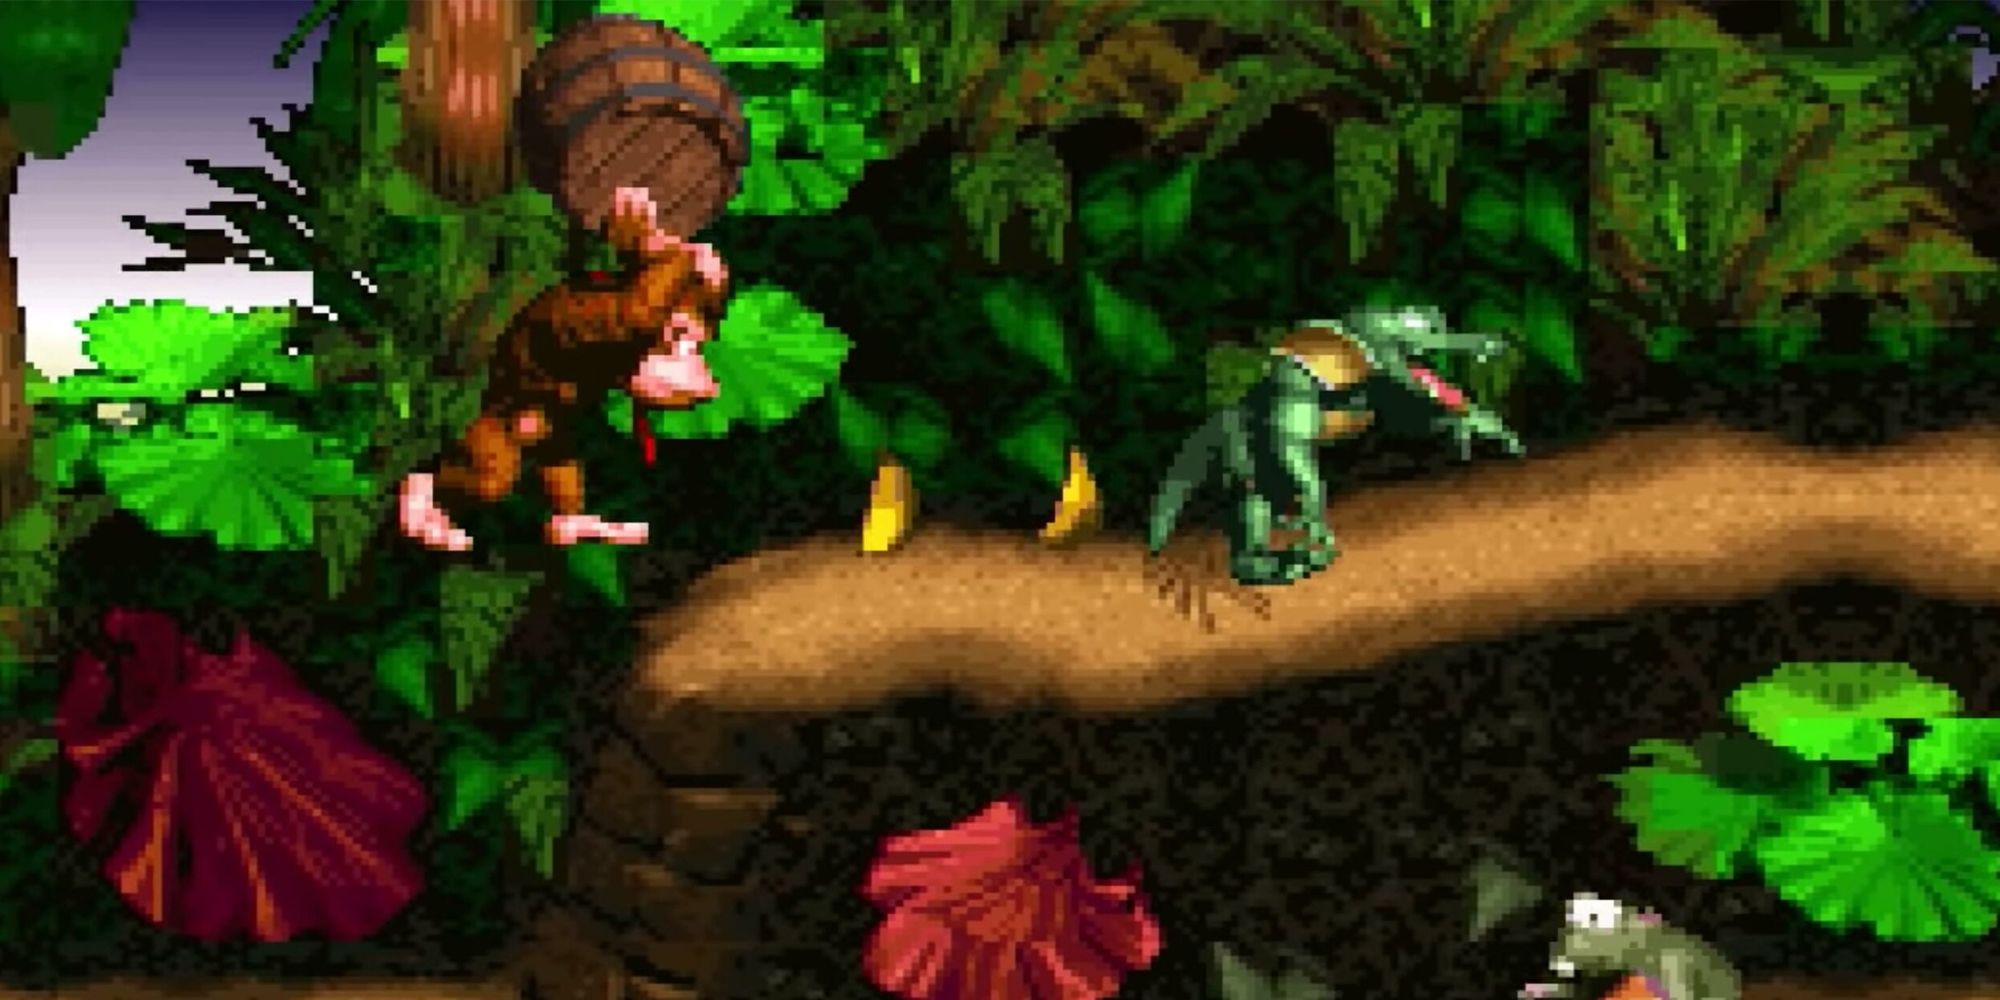 Donkey Kong in Donkey Kong Country